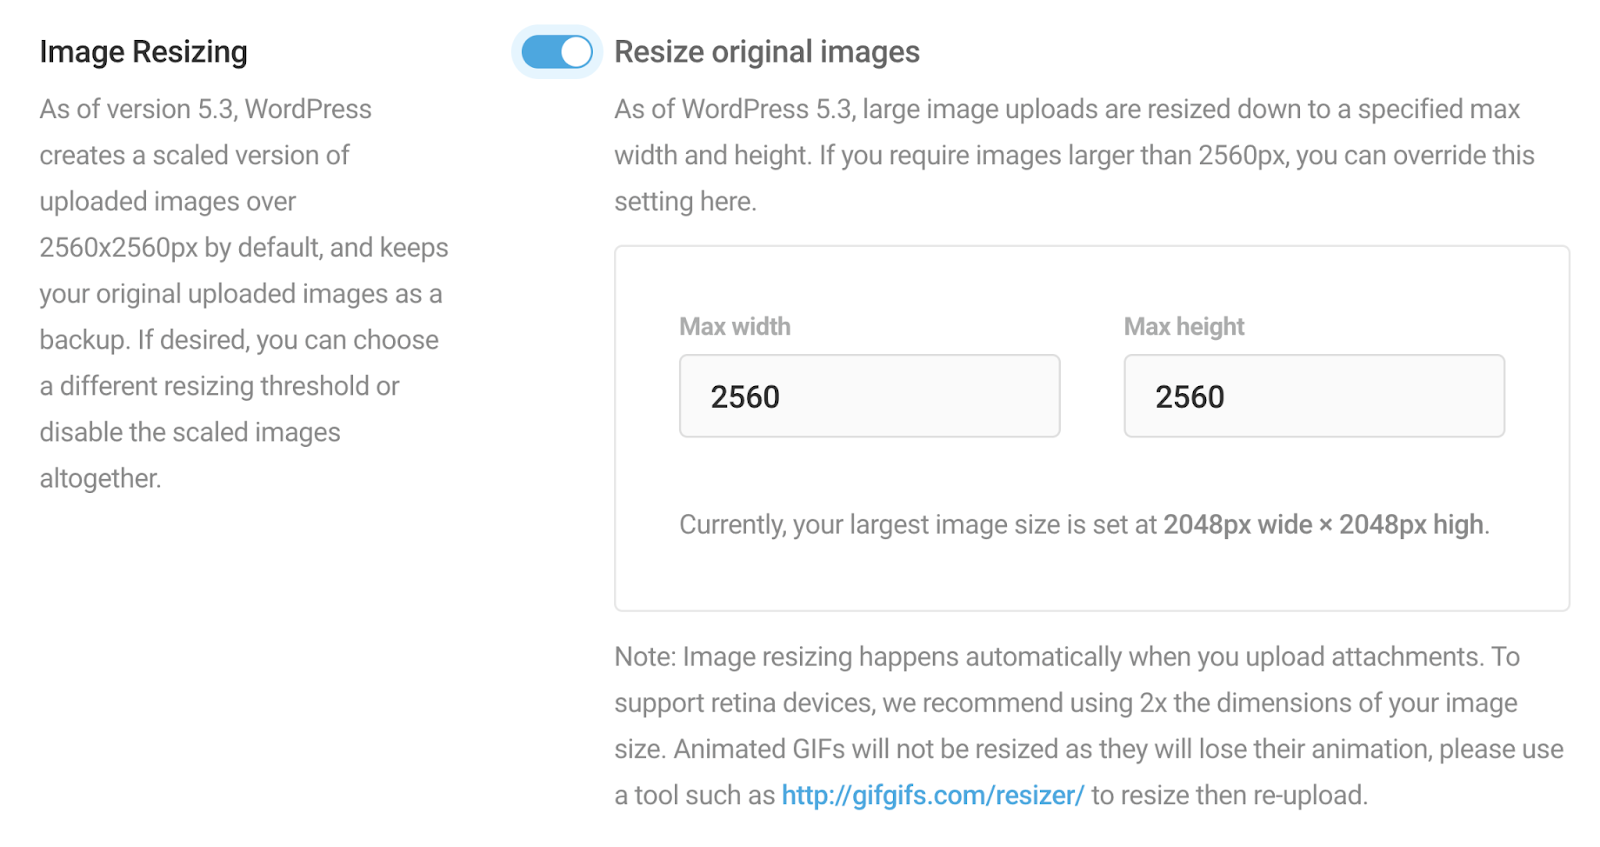 "Image Resizing" section in Smush